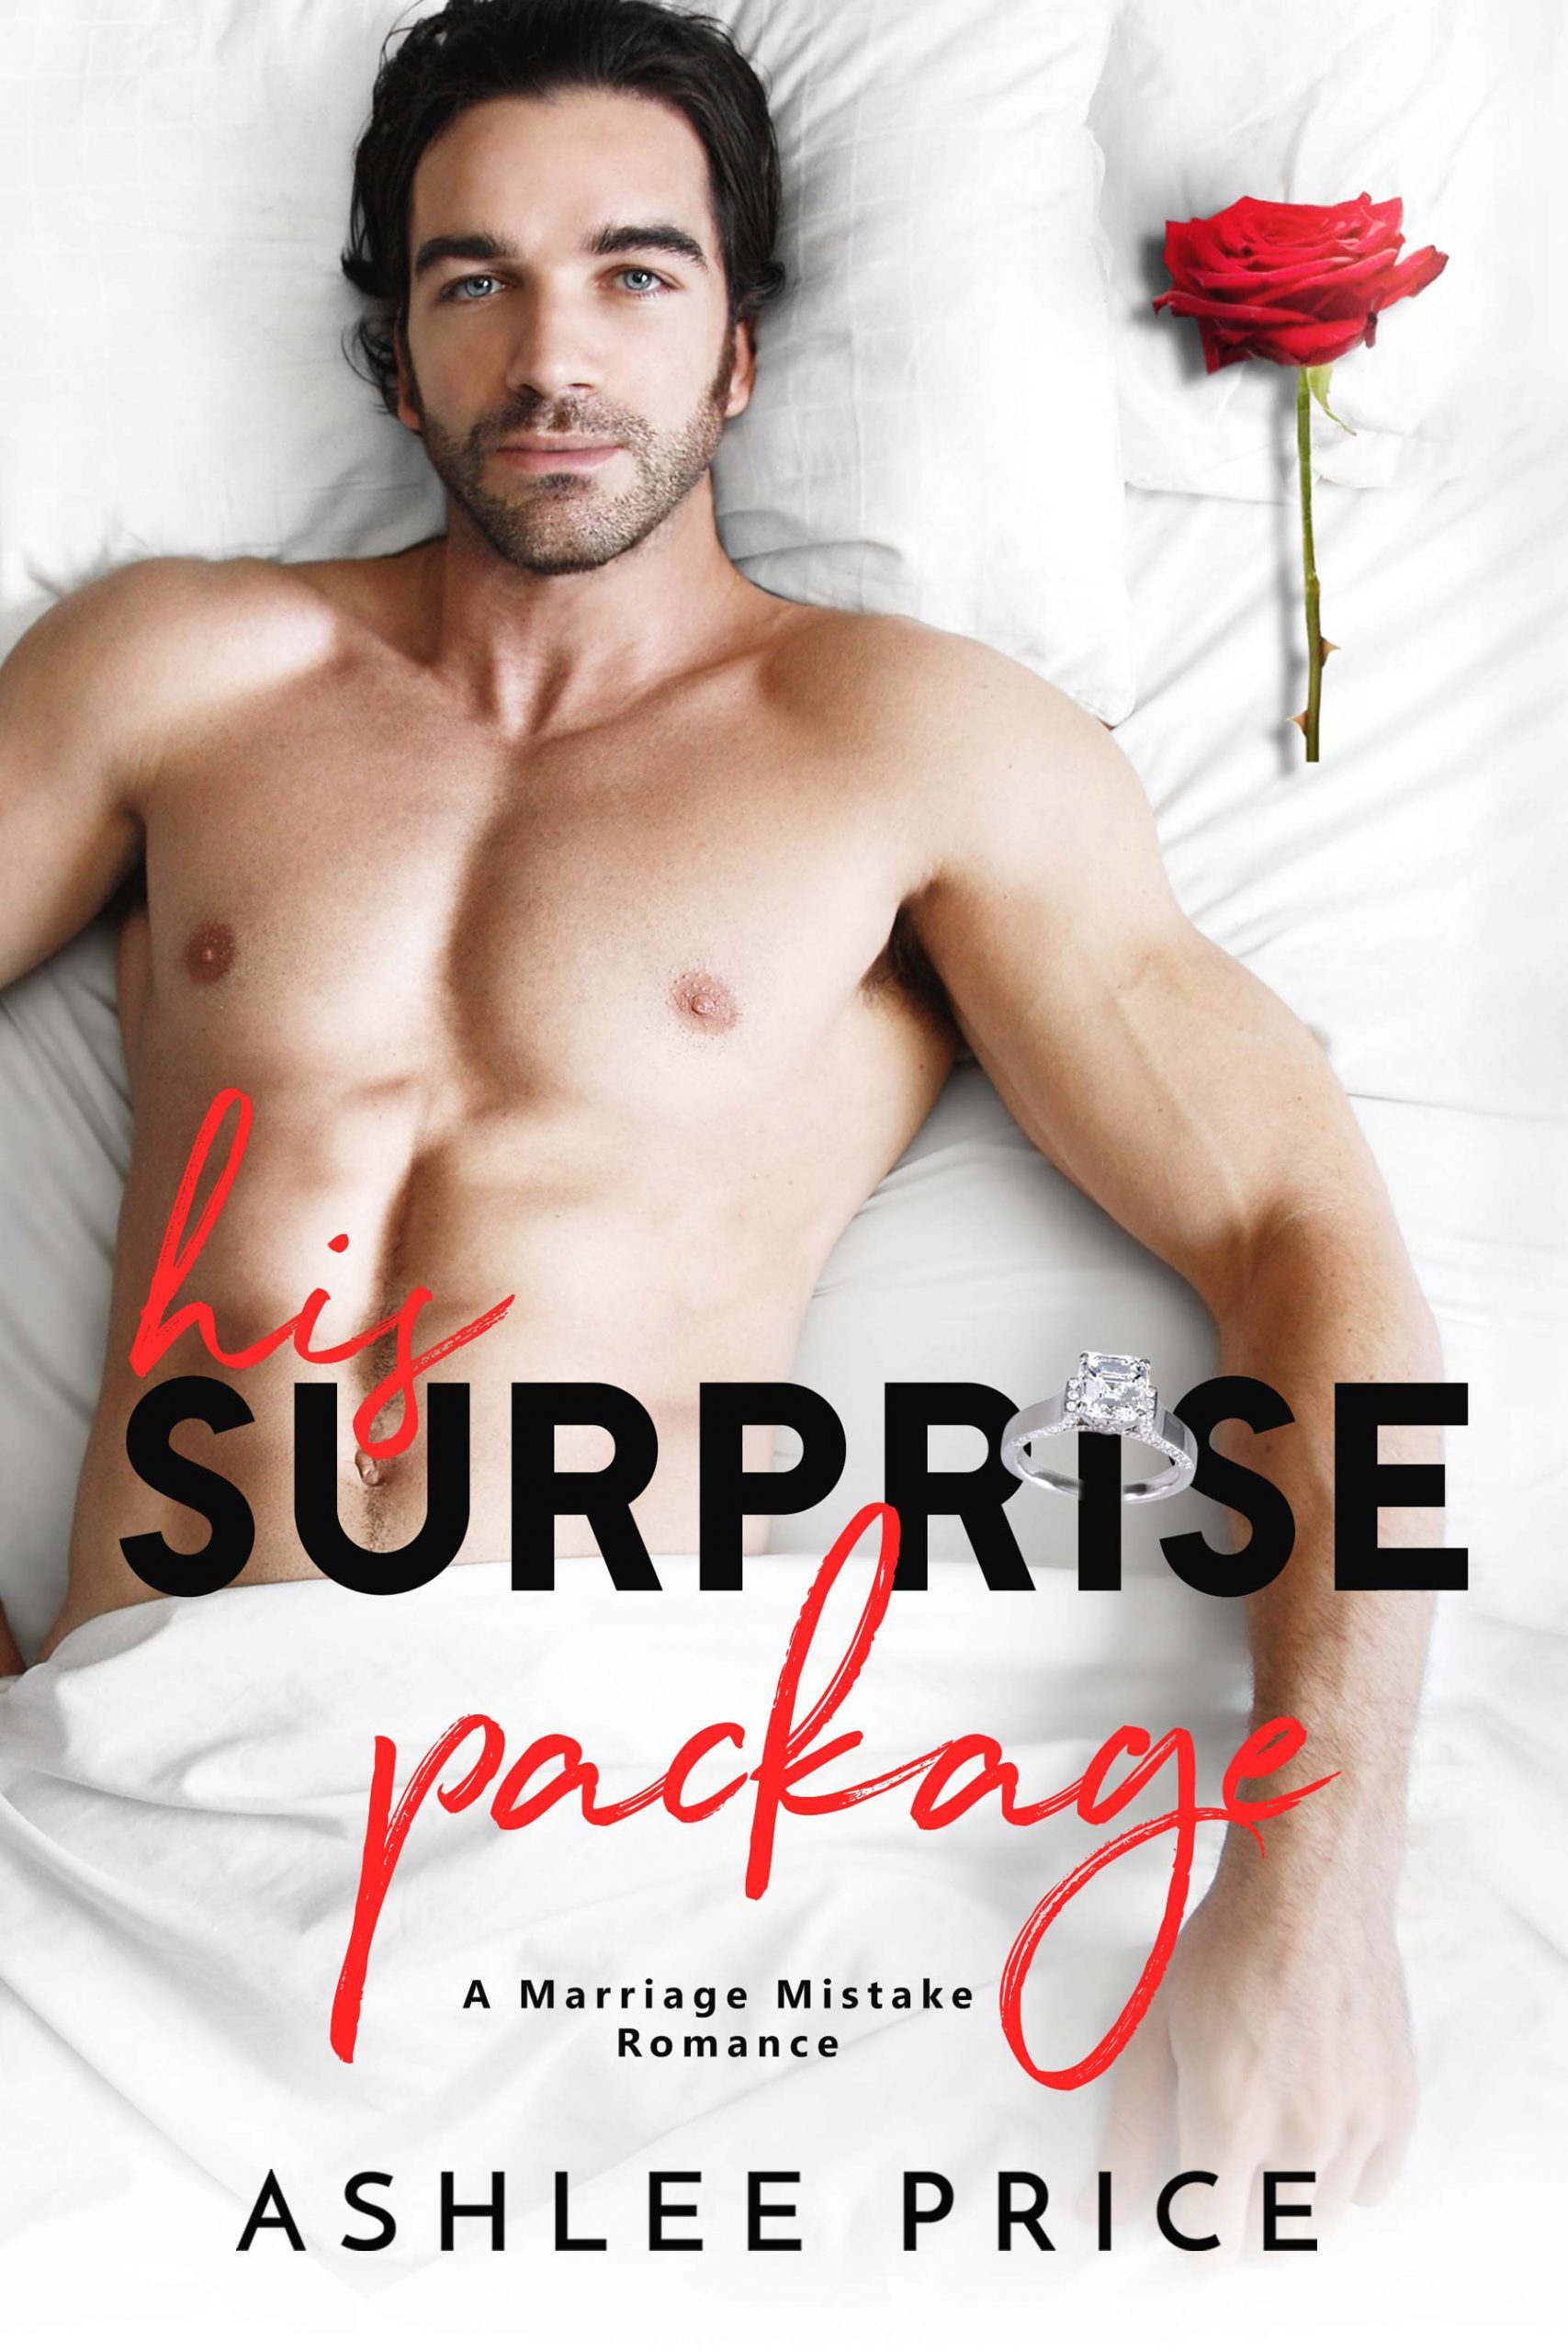 hissurprisepackage6x9new-2721301